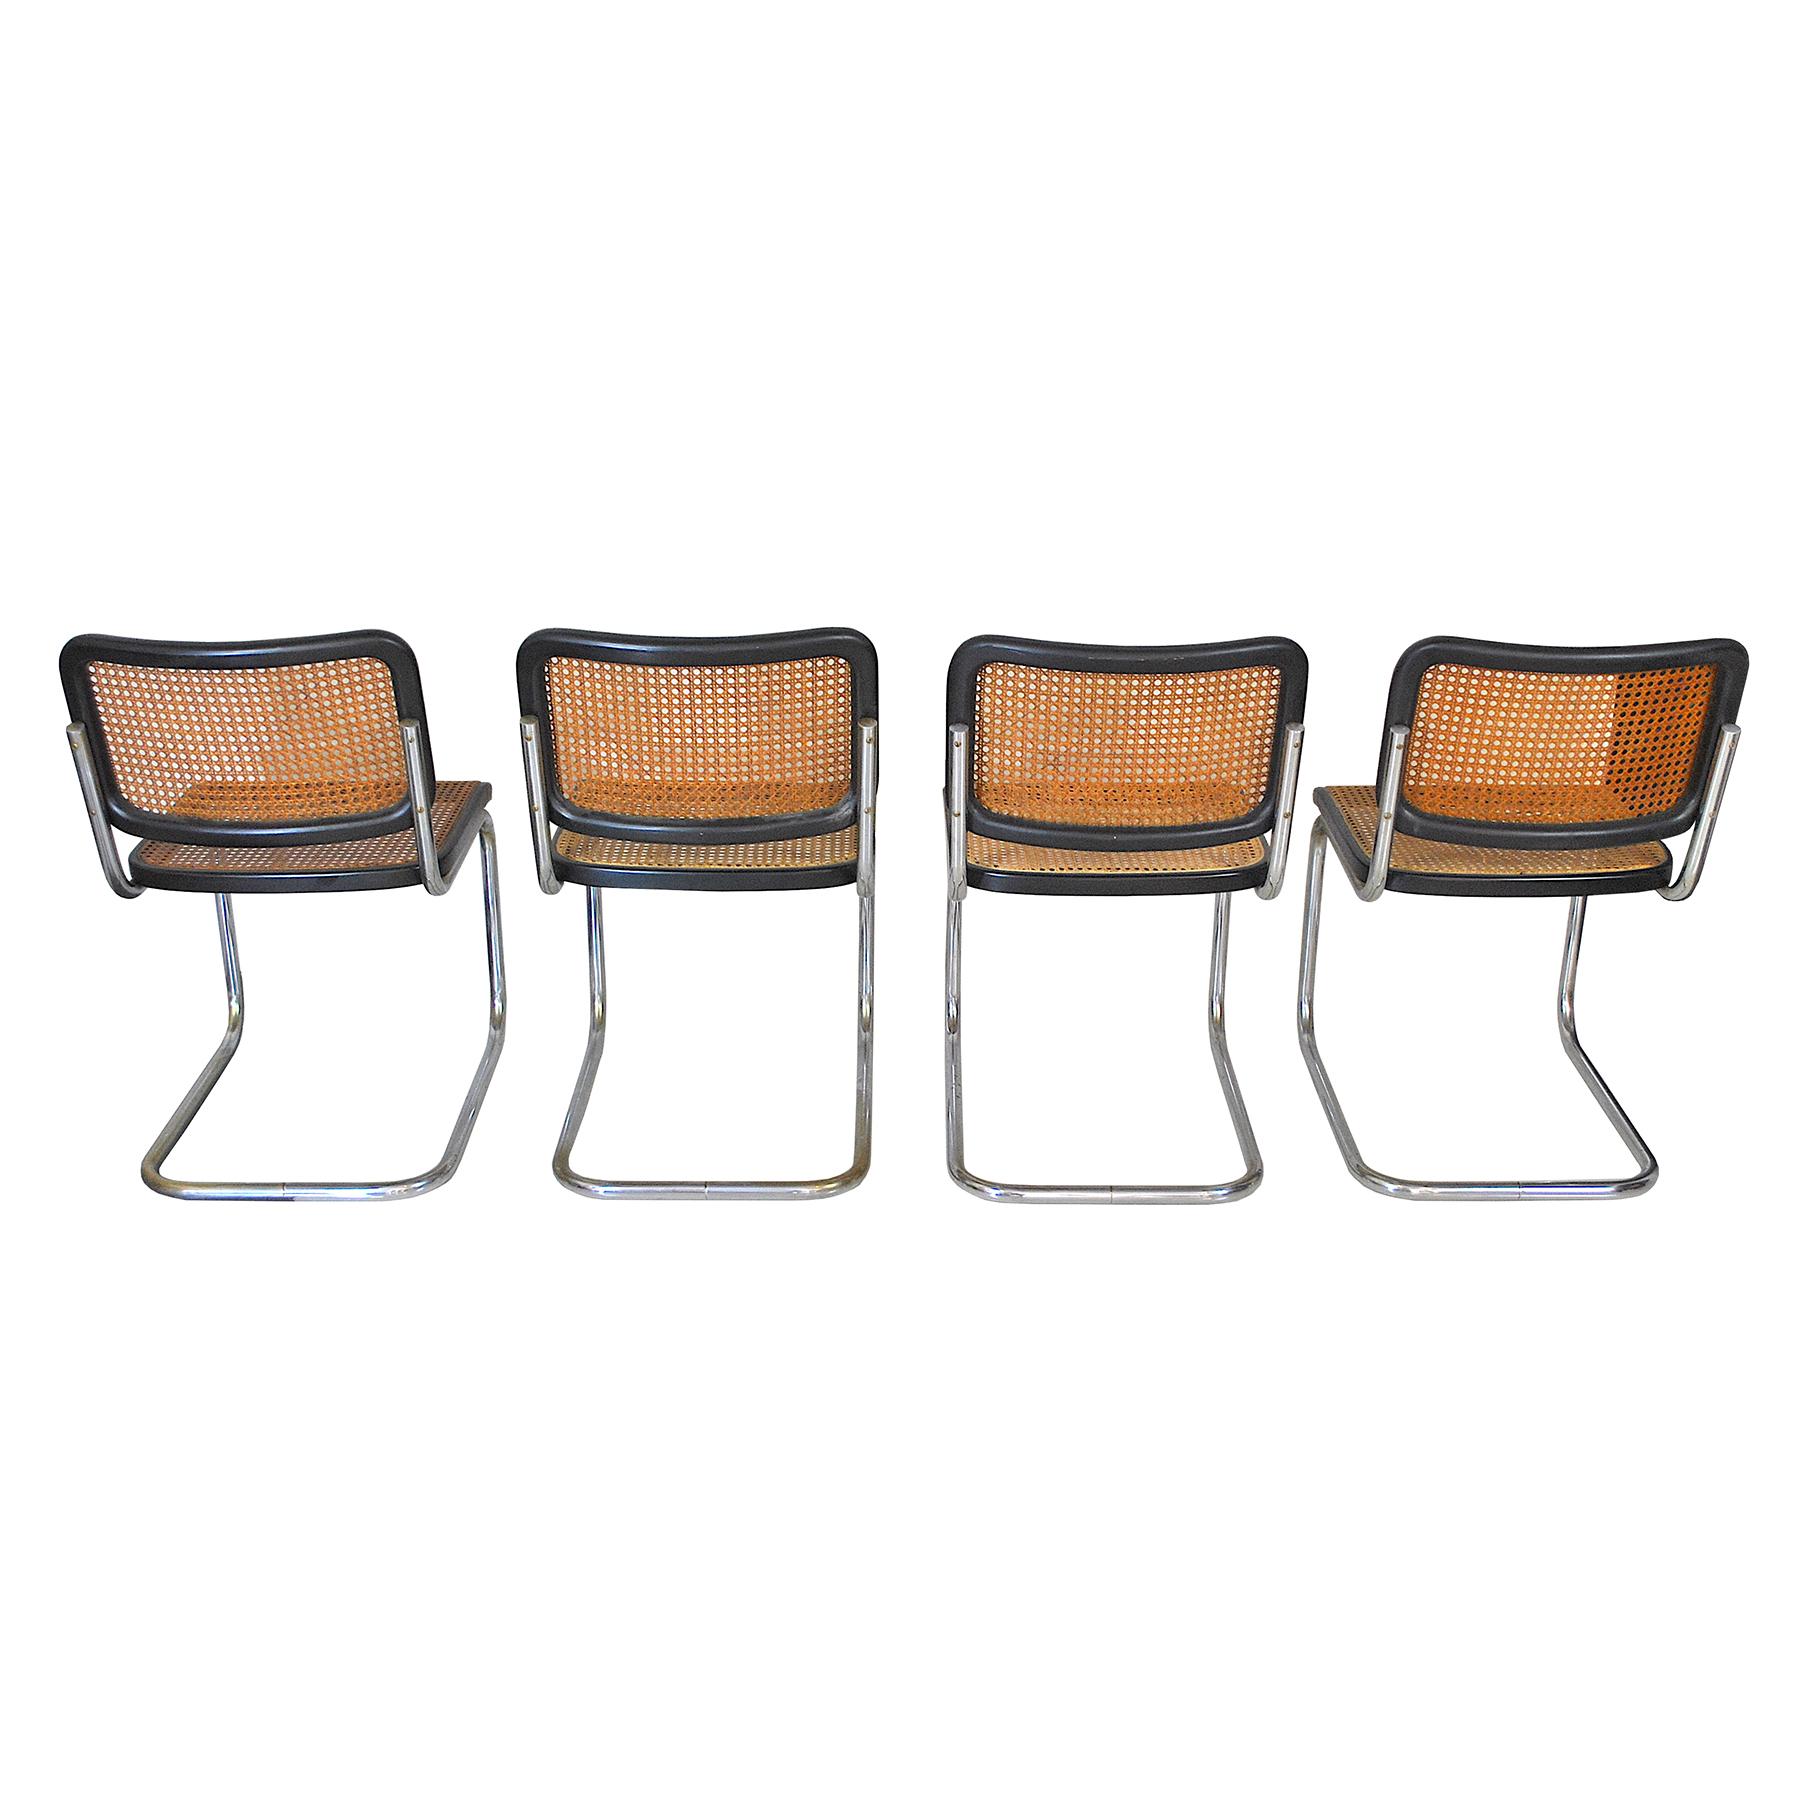 Born from the idea of reinterpreting the Mart Stam cantilever chair, reducing the tubular and inserting curved wood and Indian cane.
In addition to the Classic woven cane cover, there is the version with synthetic mesh or leather seat.
The tubular